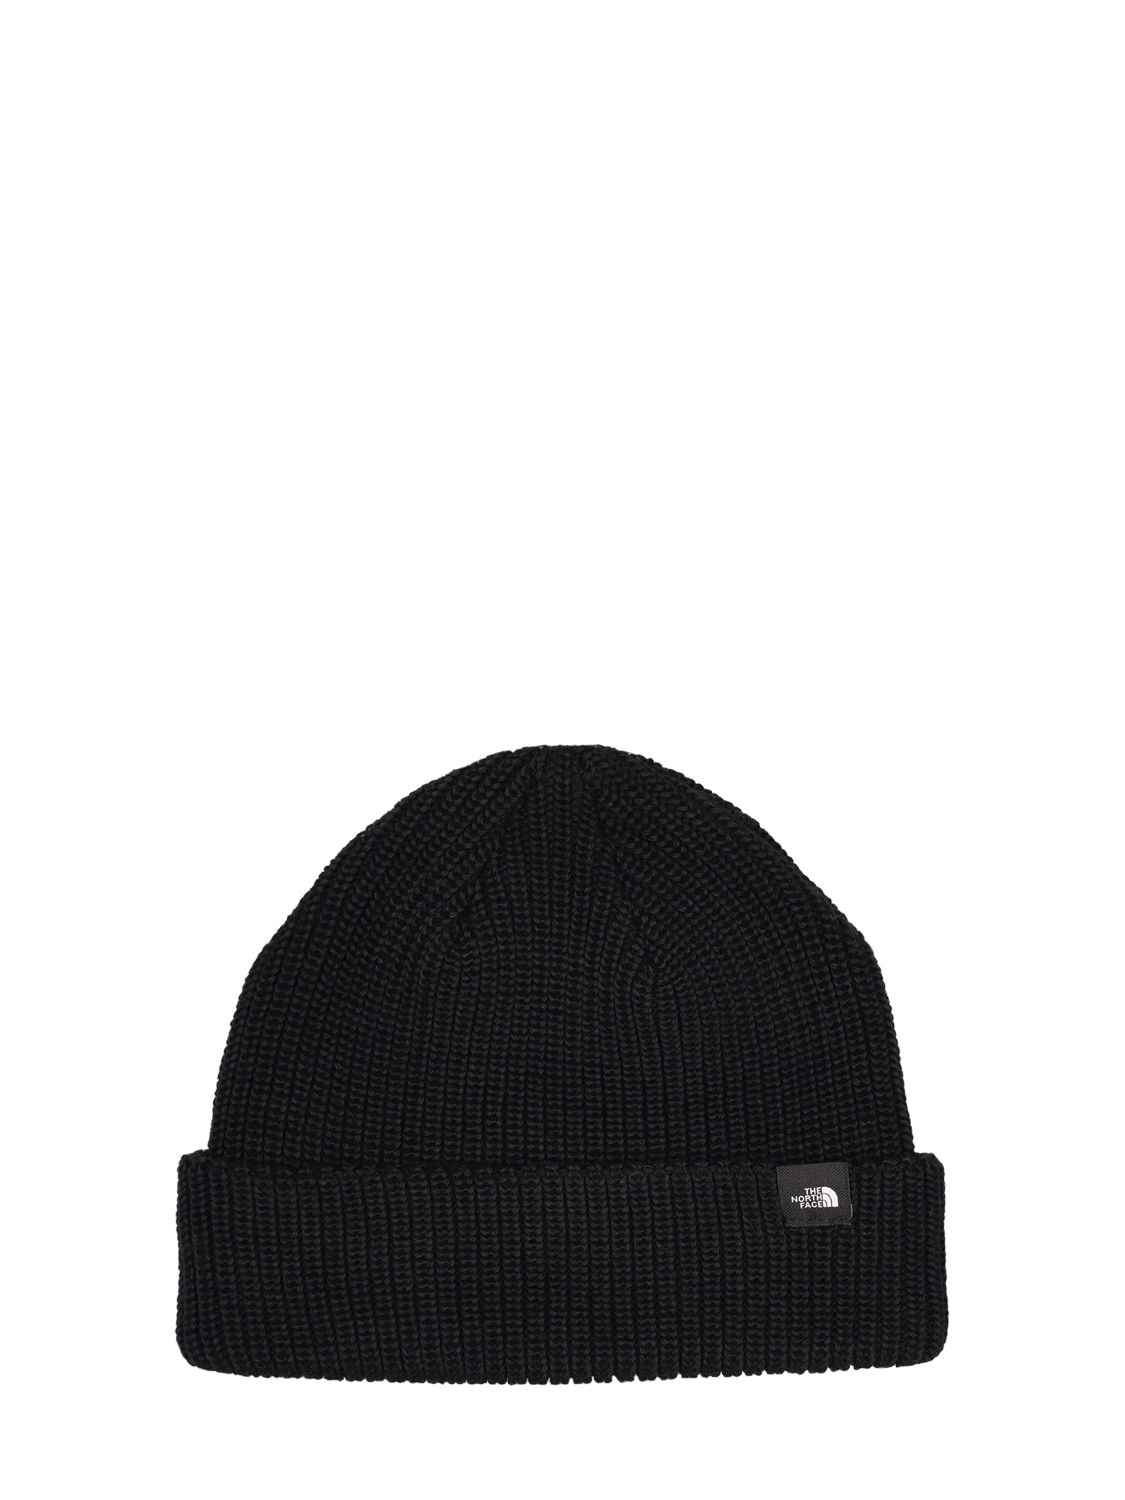 THE NORTH FACE FISHERMAN KNIT BEANIE